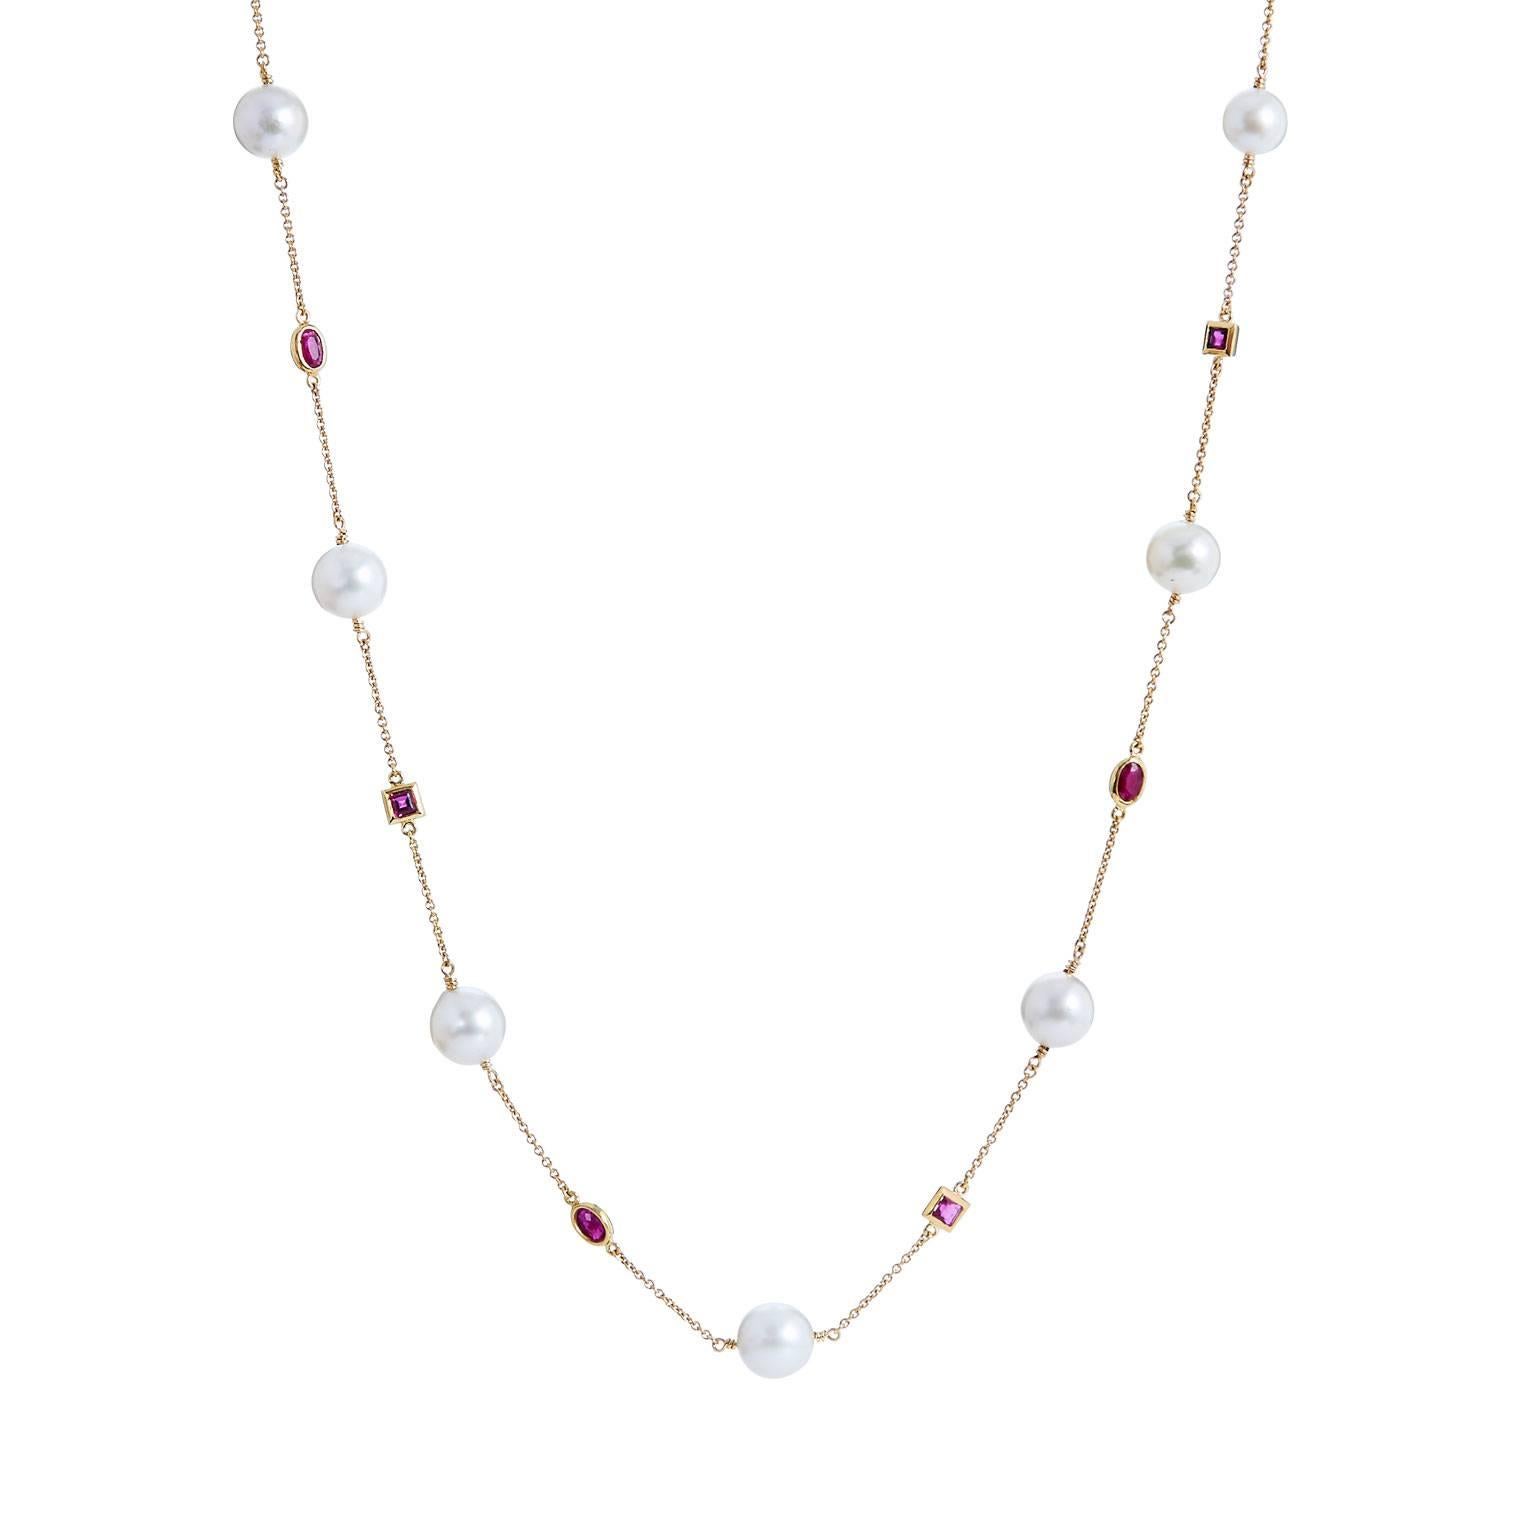 H & H Ruby and Akoya Pearl Necklace